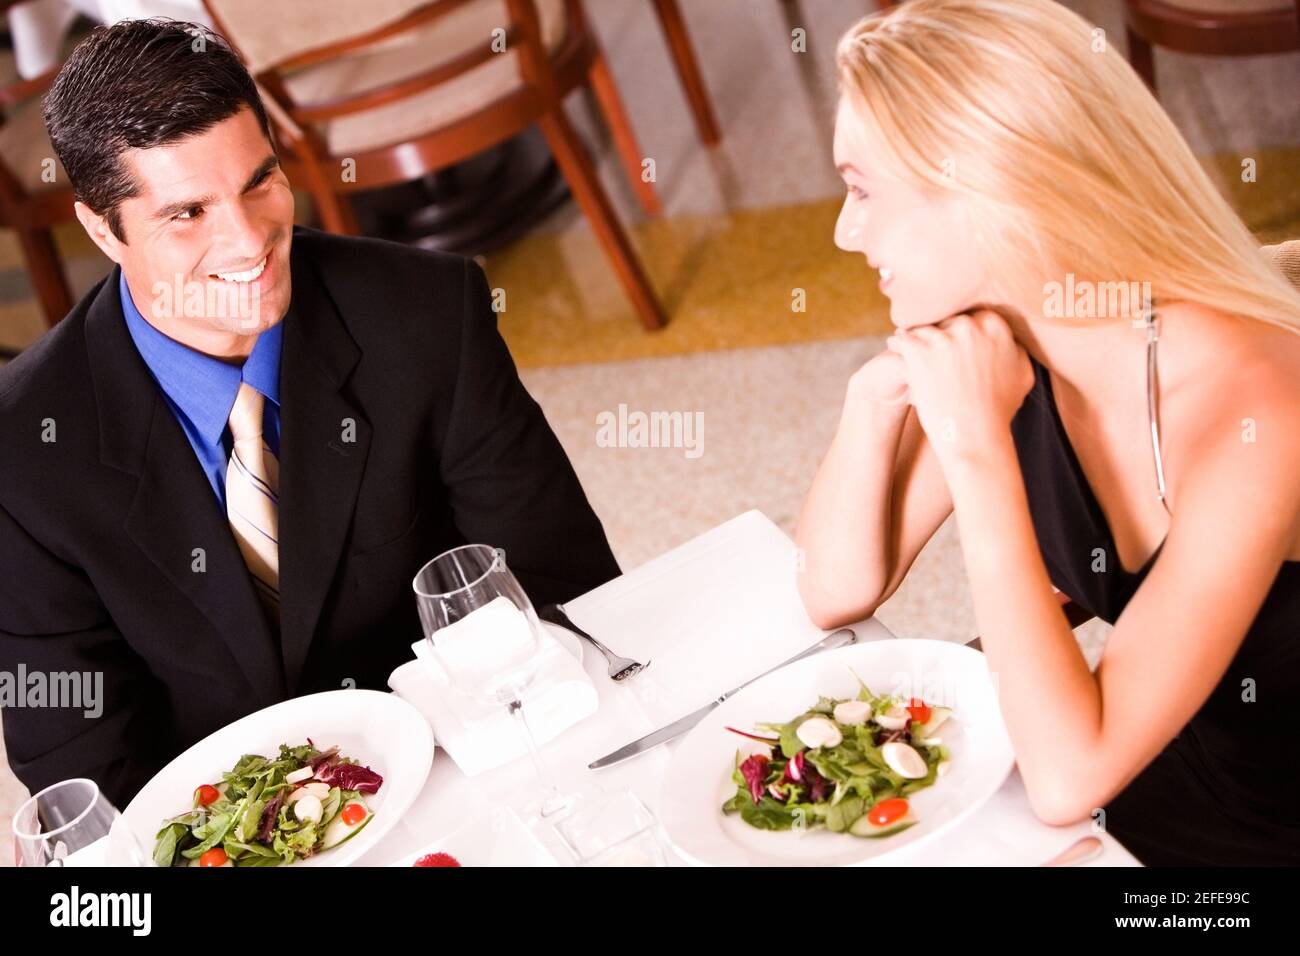 High angle view of a mid adult man and a young woman sitting at a table in a restaurant Stock Photo